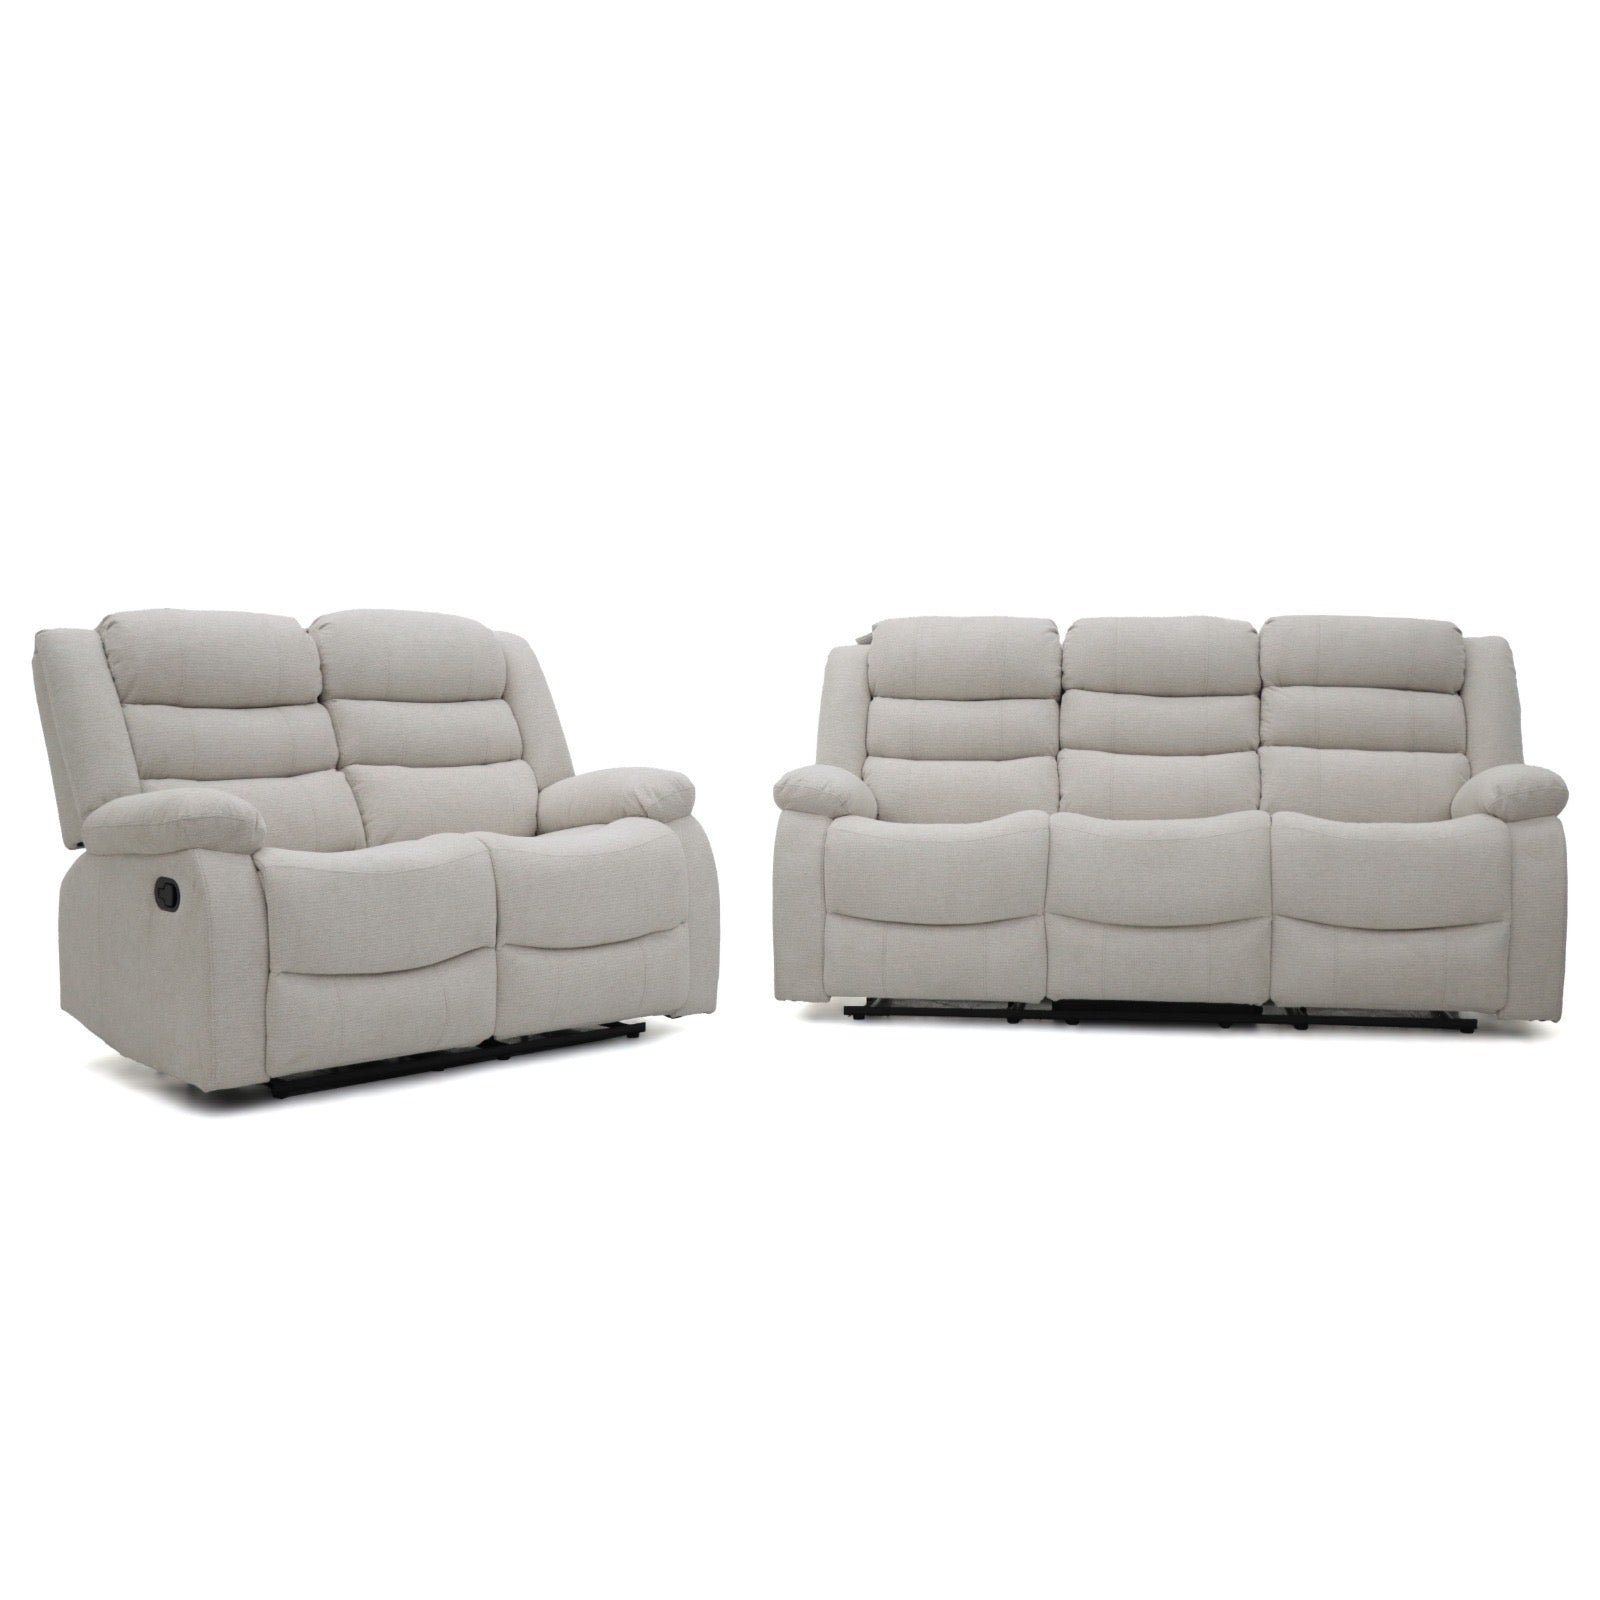 Augusta 3 Seater and 2 Seater Manual Recliner Beige Fabric